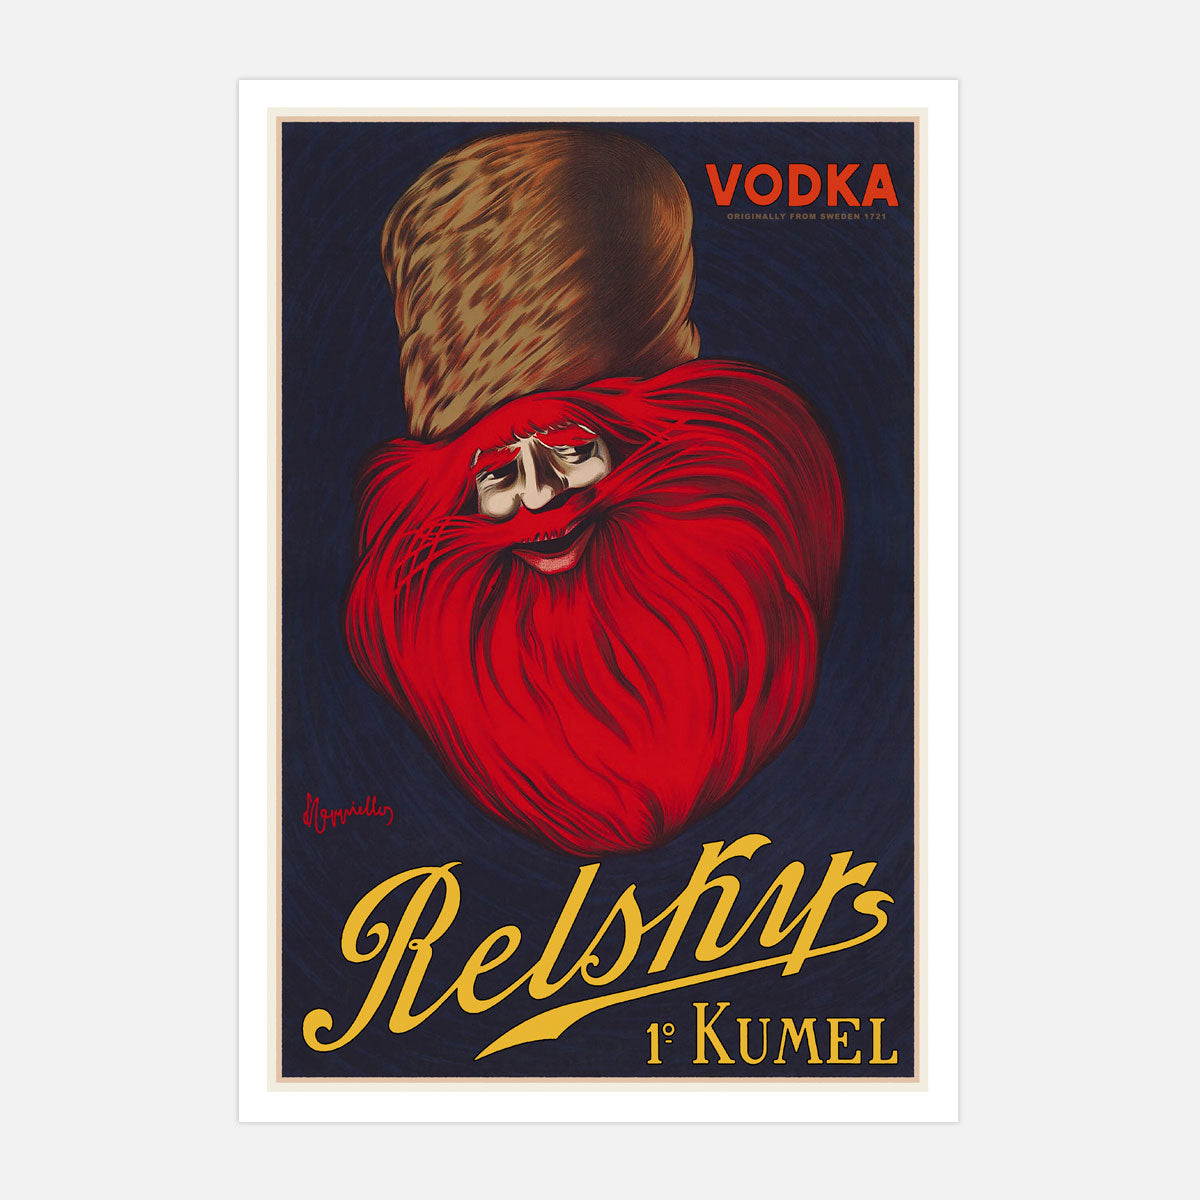 Relskys Vodka retro vintage poster from Places We Luv